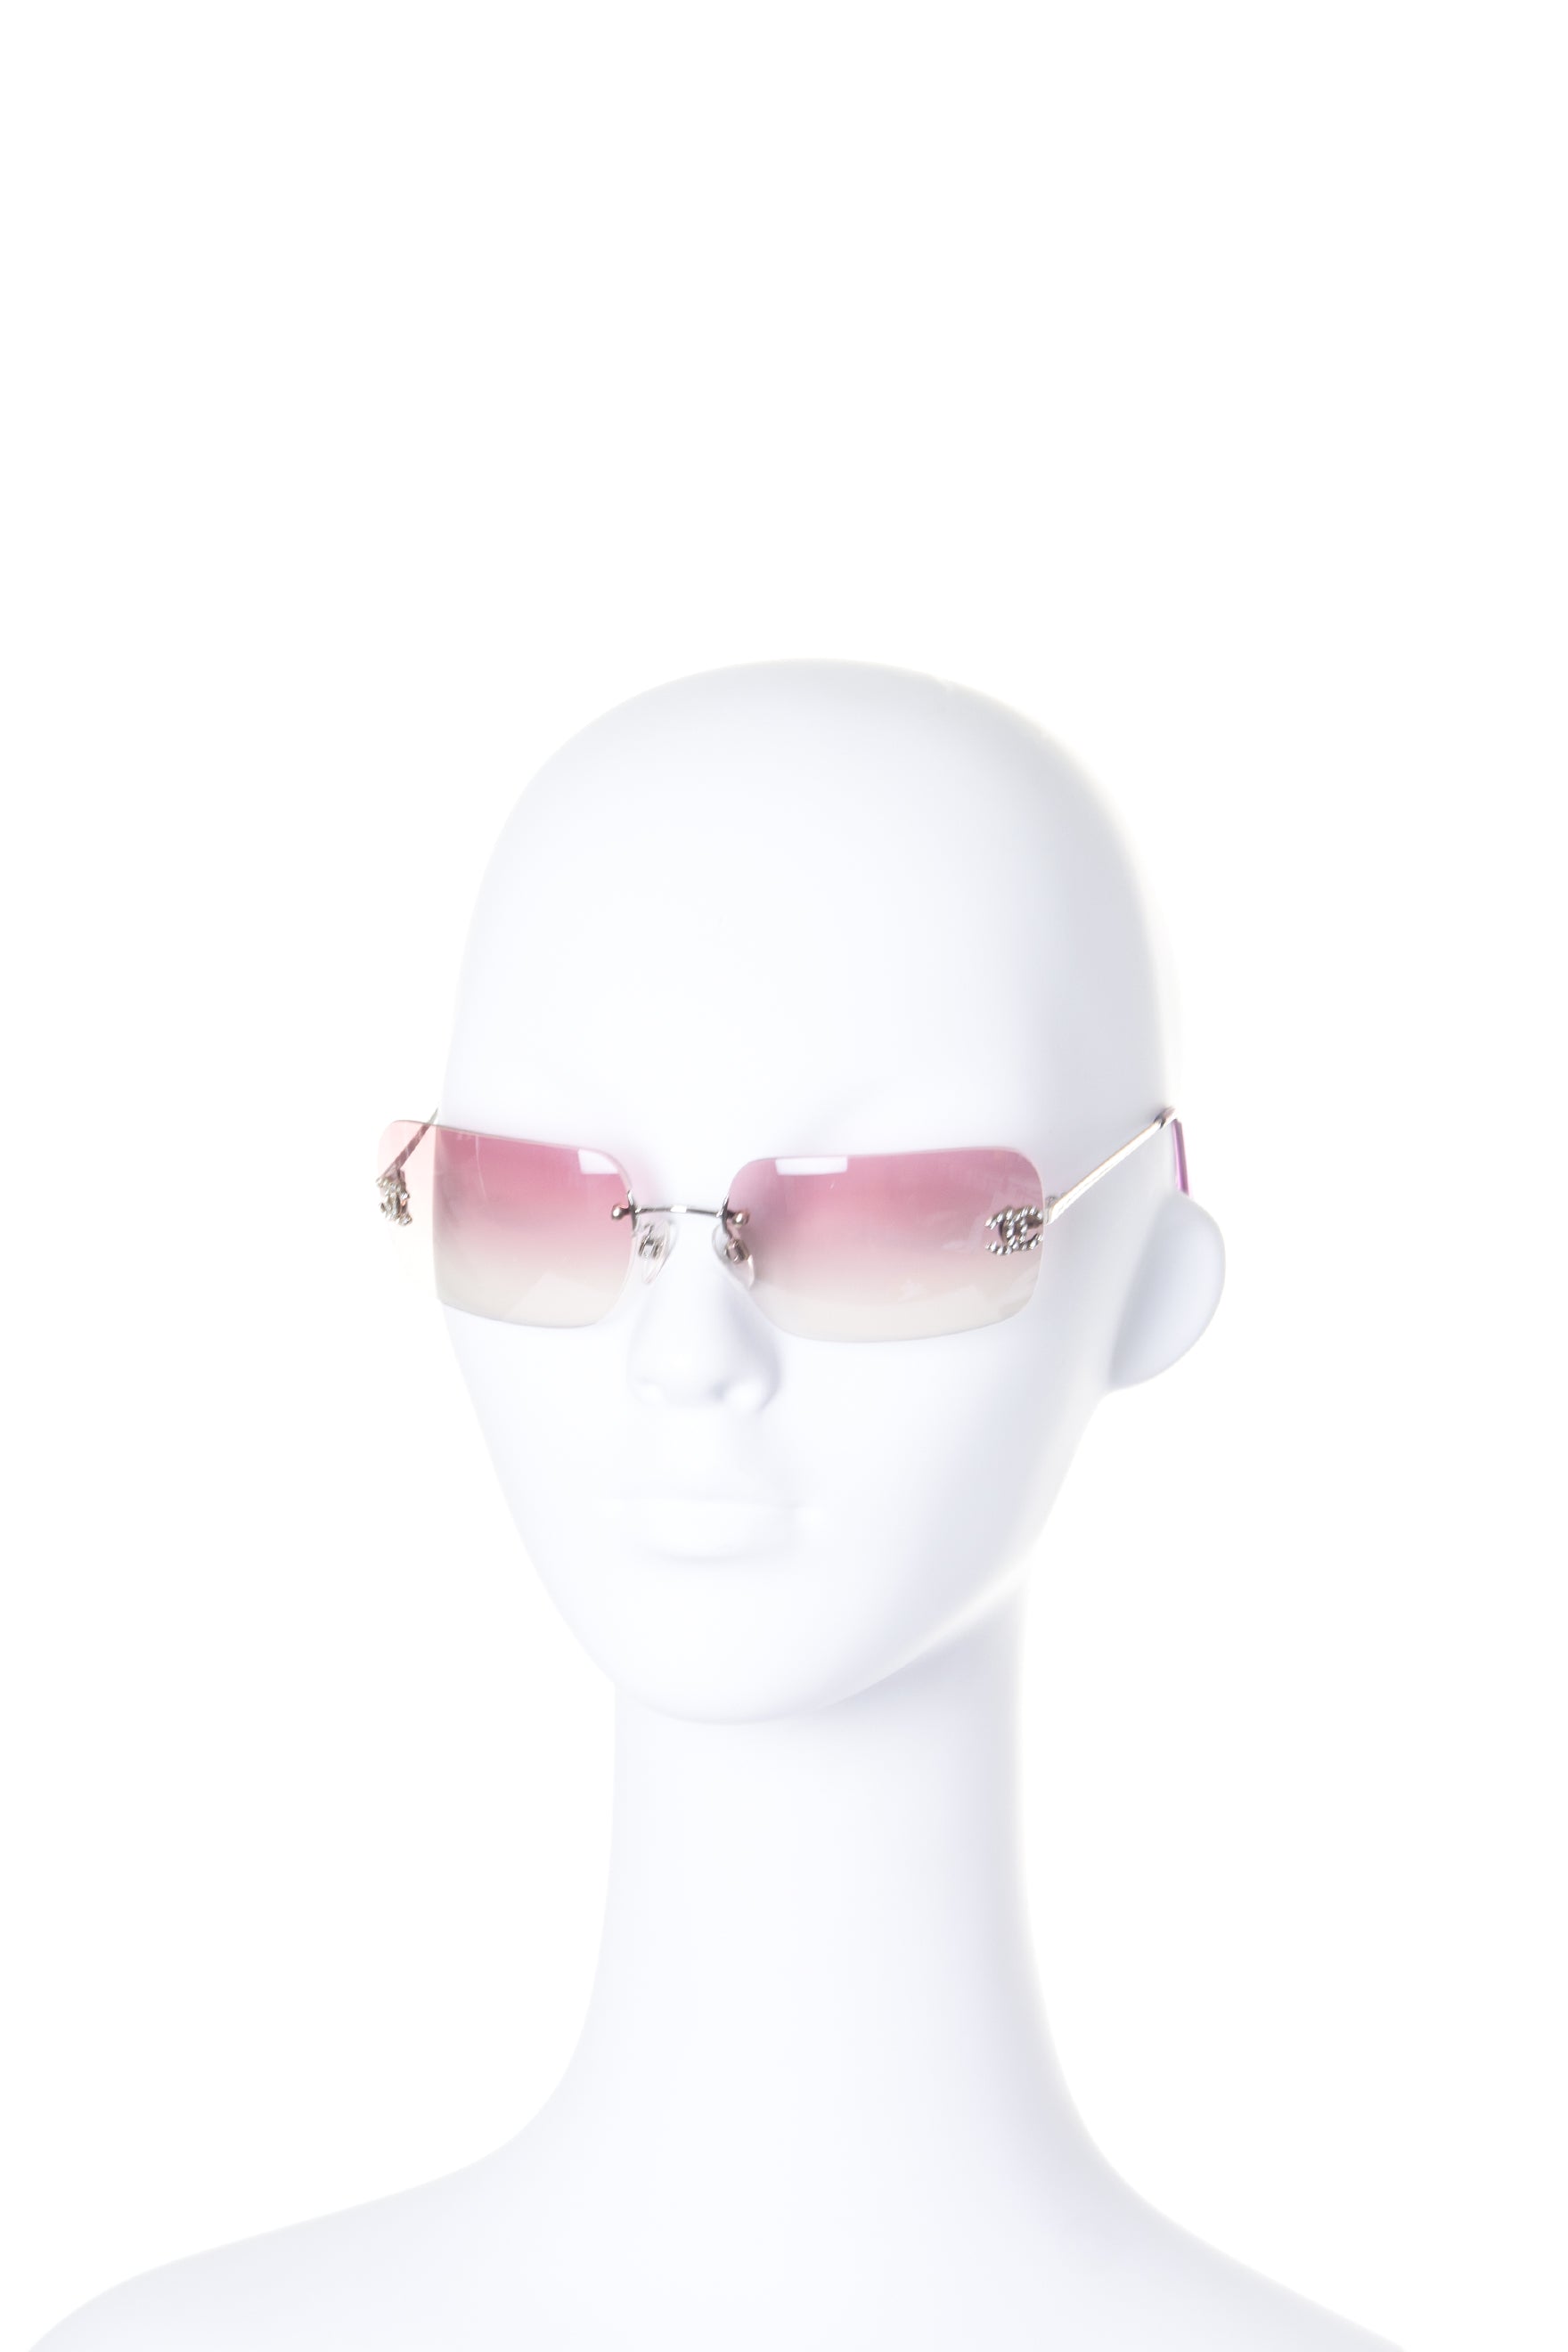 Chanel Ombre Rhinestone Sunglasses as worn by Kylie Jenner